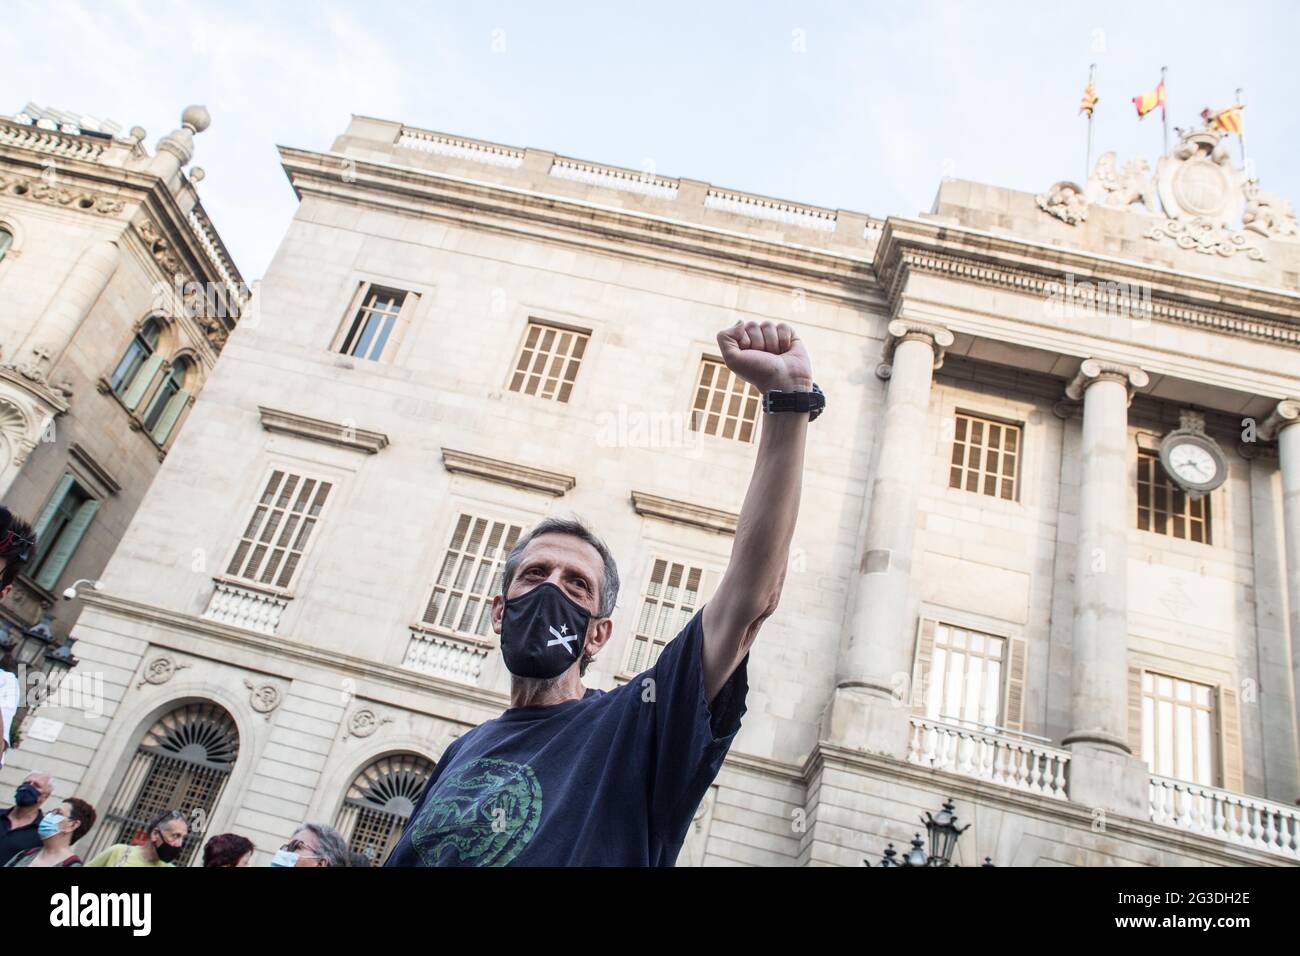 Barcelona, Spain, 15/06/2021, A protester wearing a face mask with a Catalan independence flag gesturing during the demonstration.The Catalan association that aims at achieving the political independence of Catalonia, the Catalan National Assembly (ANC), has called a demonstration against the visit to Catalonia of the Spanish King, Felipe VI, to attend the inaugural dinner of the XXXVI Meeting of the Barcelona business organization, Circulo de Economia (Economy Circle). The demonstration was attended by the president of the ANC, Elisenda Paluzie, who participated in the burning of photos of th Stock Photo